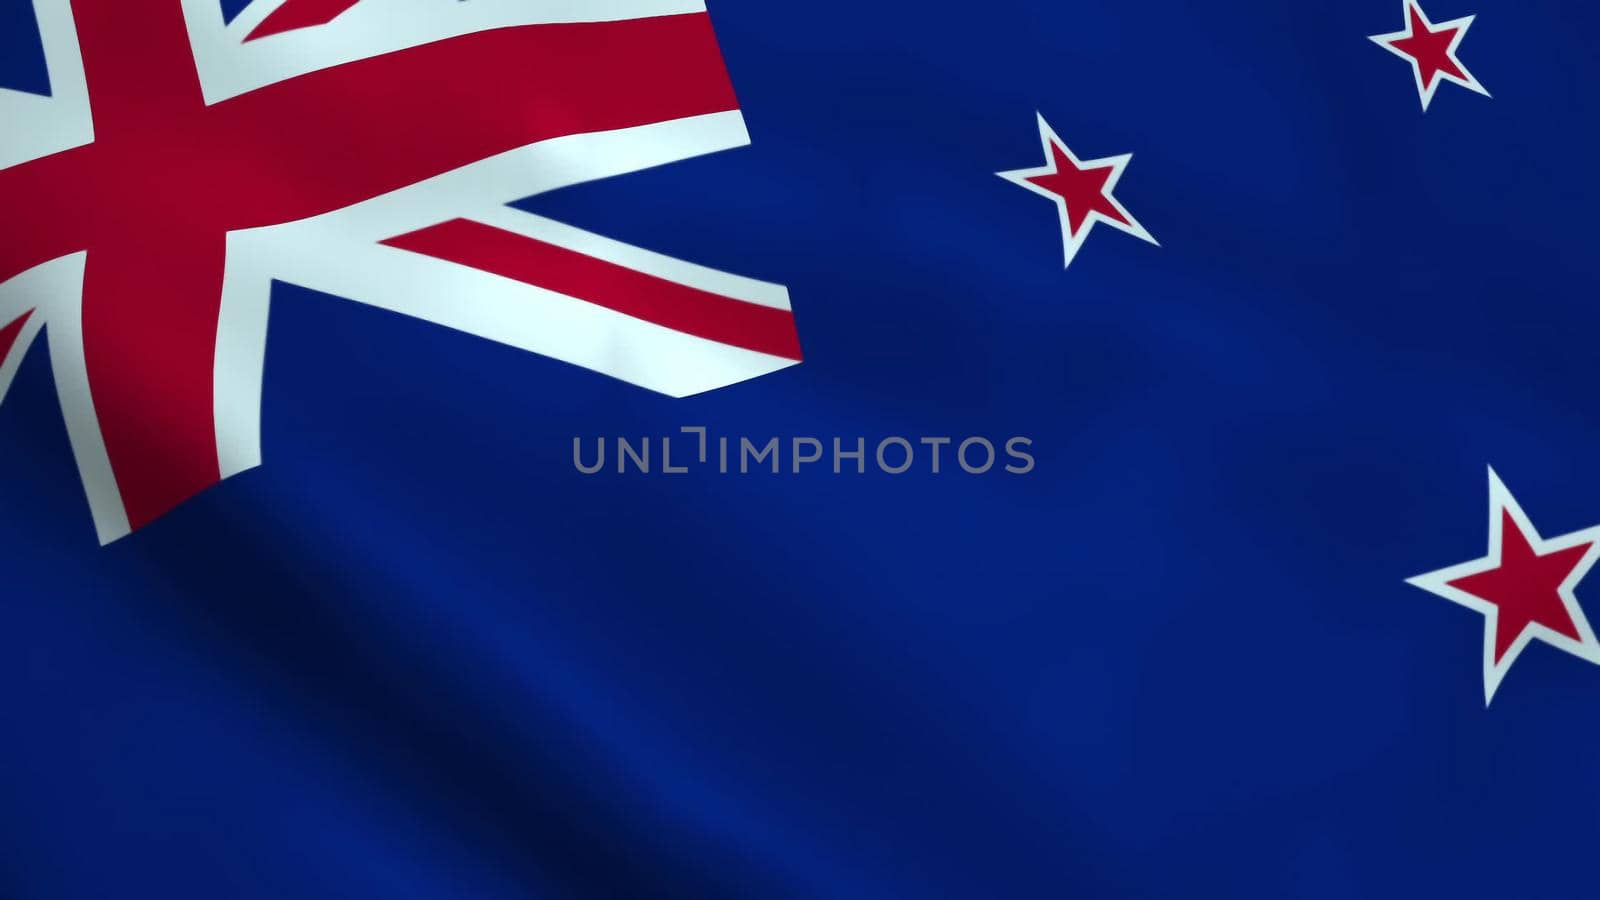 Realistic New Zealand flag waving in the wind.